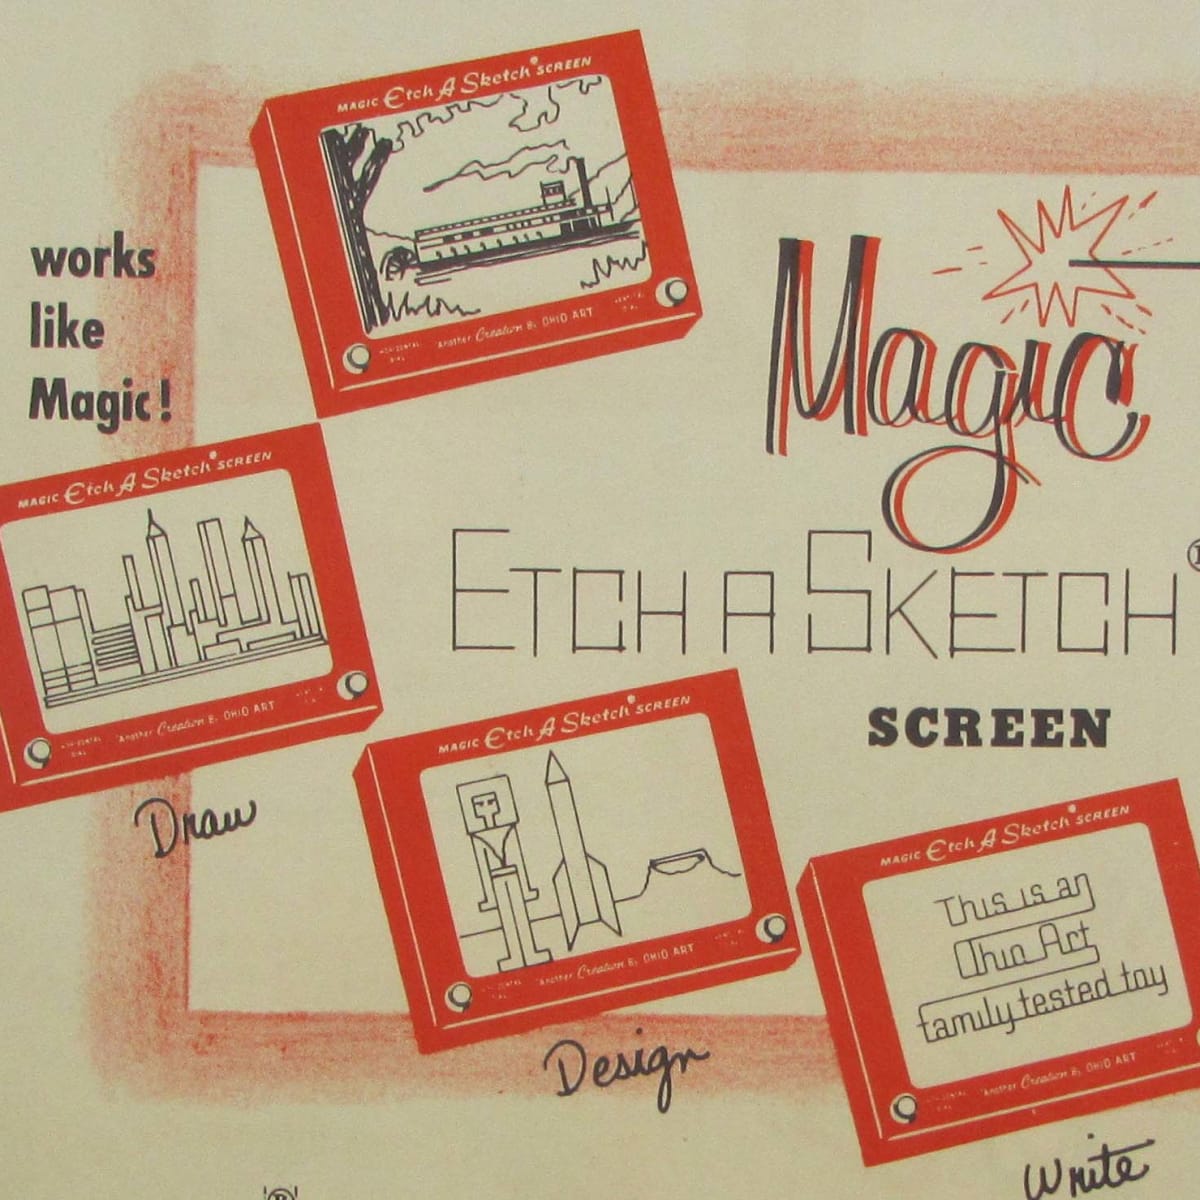 Etch A Sketch Becomes a Symbol of Second Chances  The New York Times